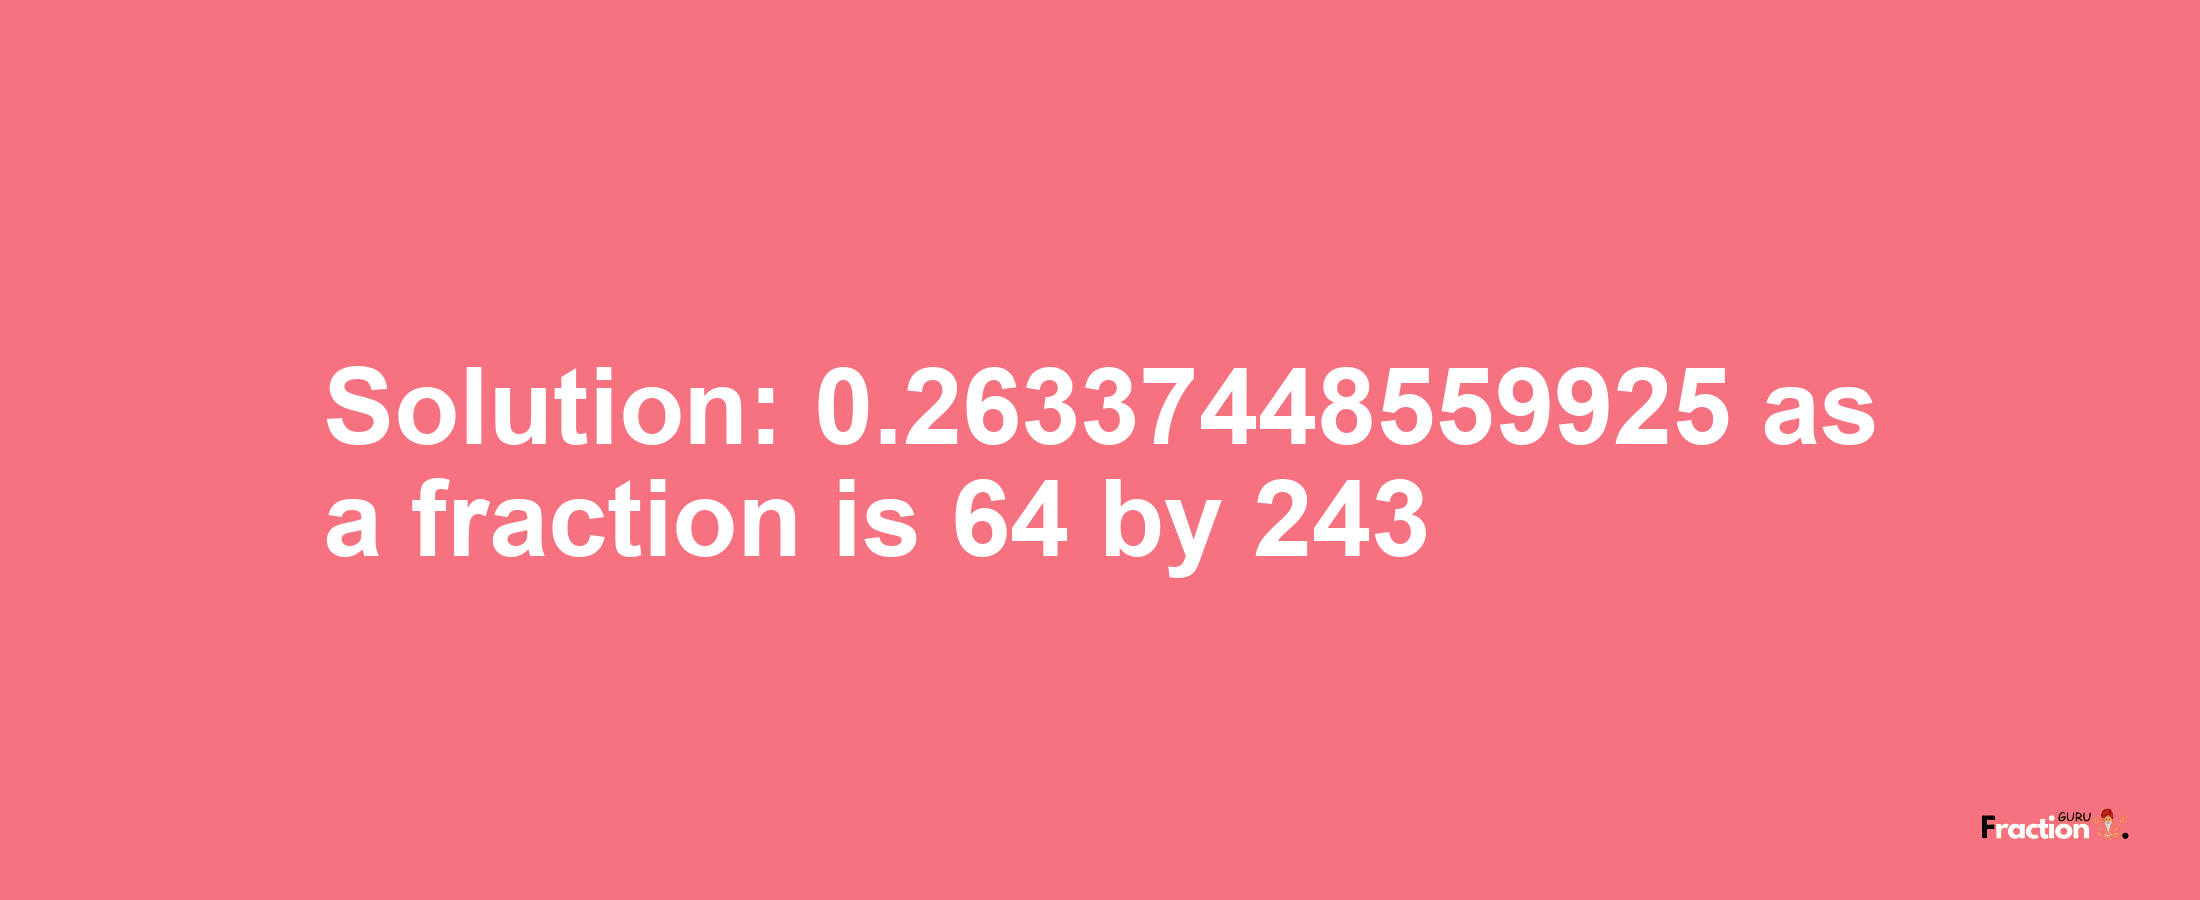 Solution:0.26337448559925 as a fraction is 64/243